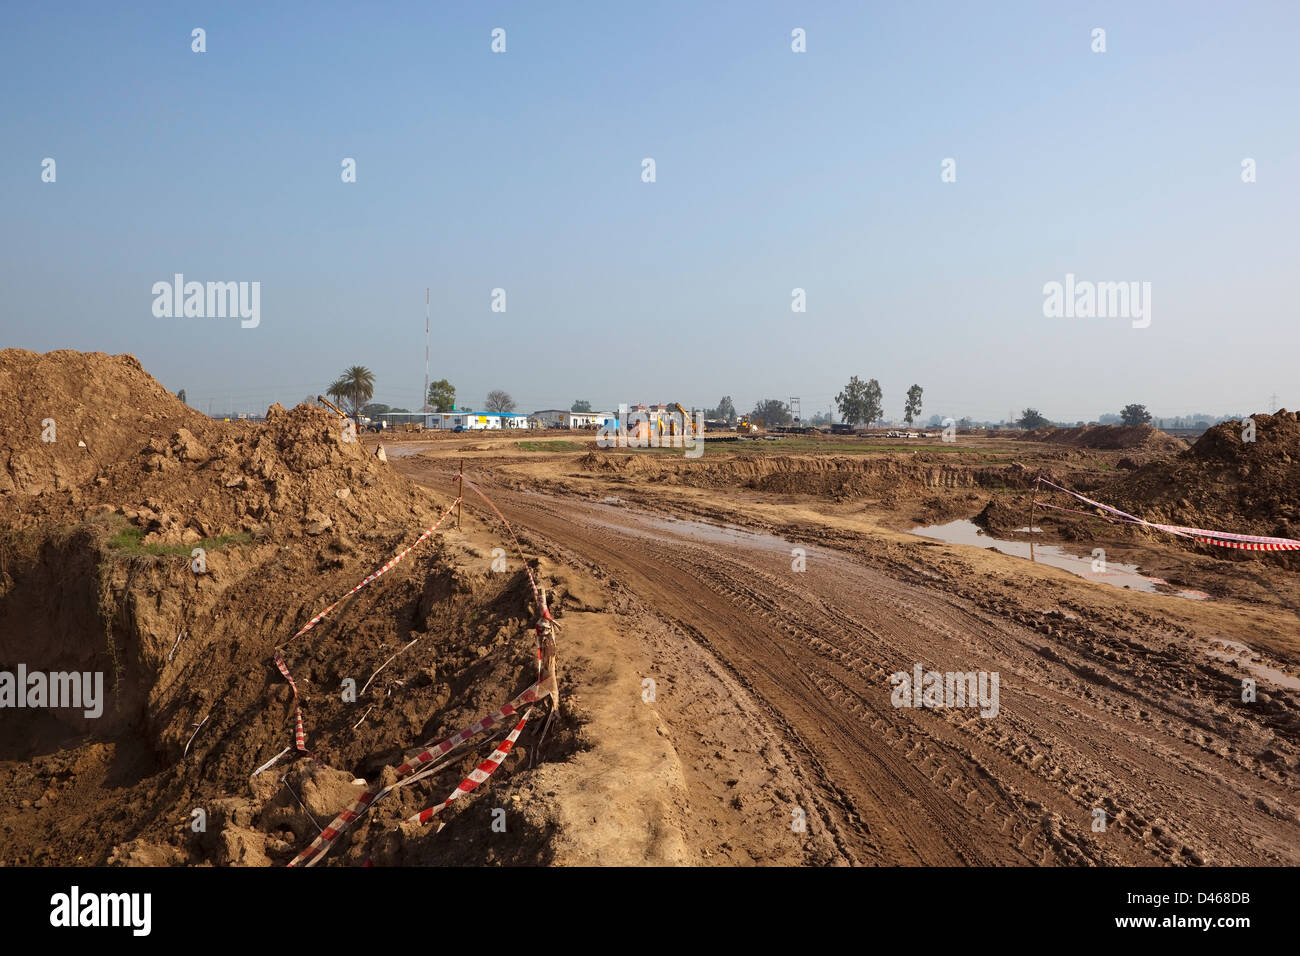 A new construction site on former agricultural land in the district of mohali chandigarh Stock Photo